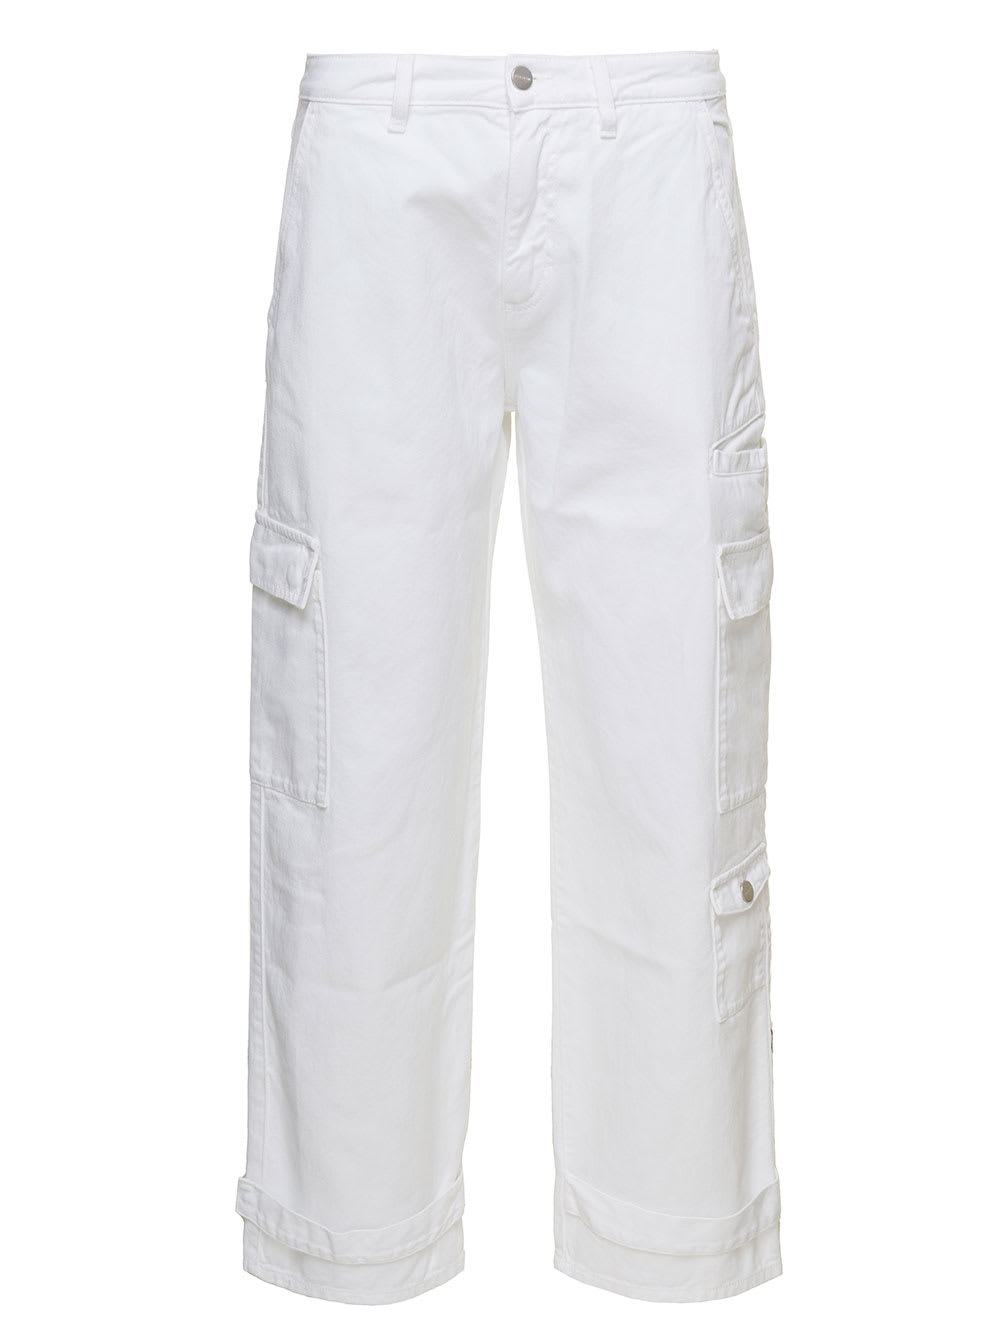 Icon Denim miki White Jeans With Patch And Welt Pockets In Cotton Denim Woman